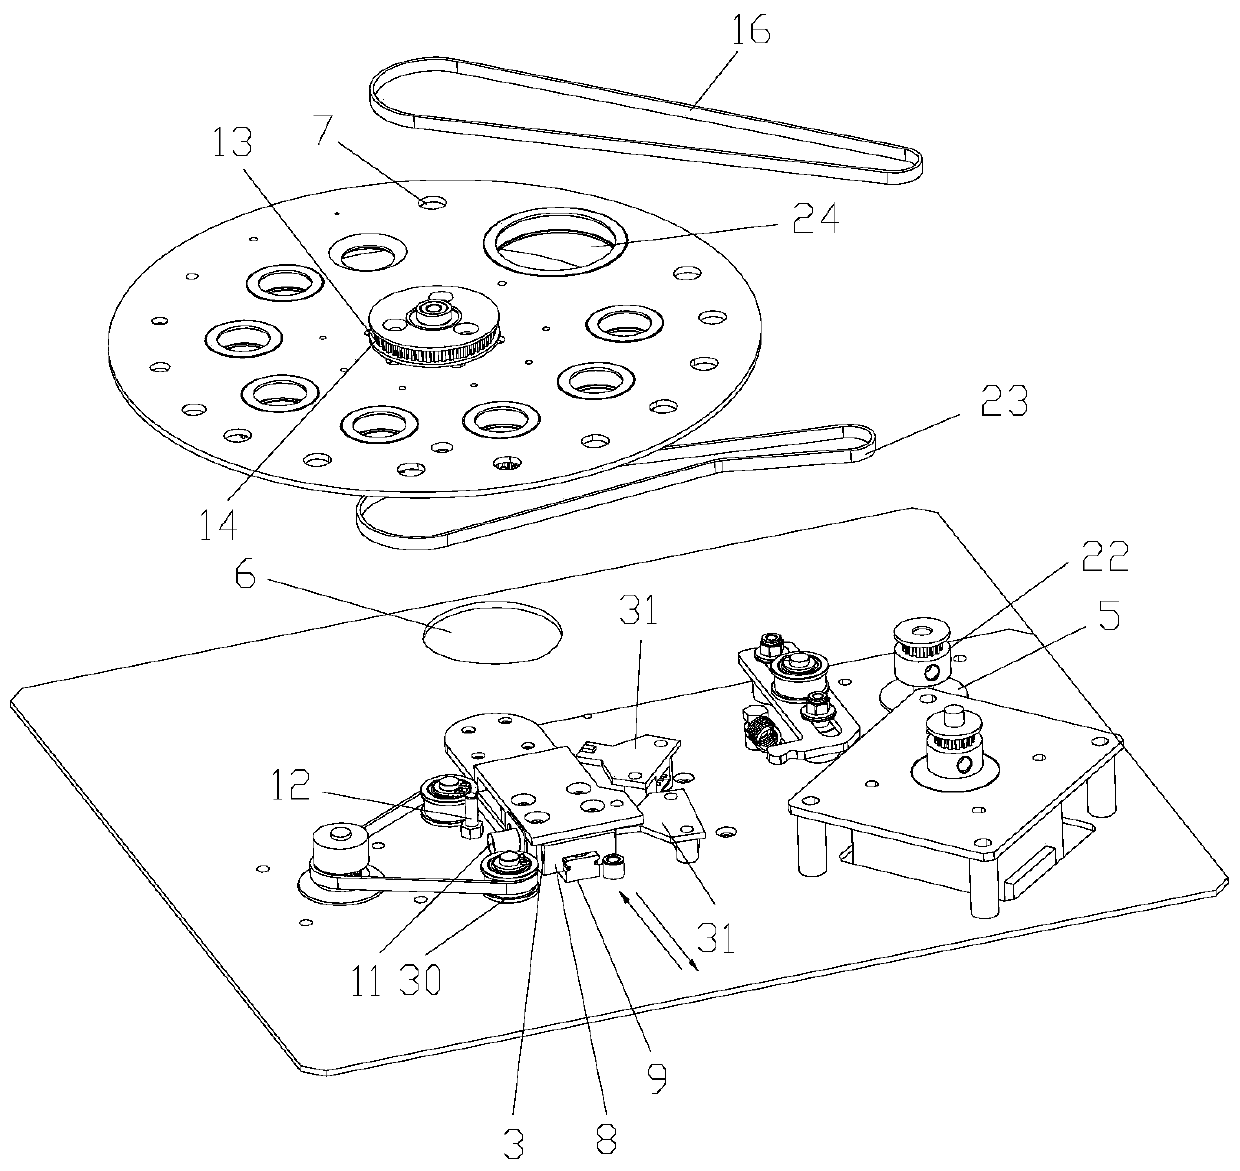 Multifunctional effect disc device